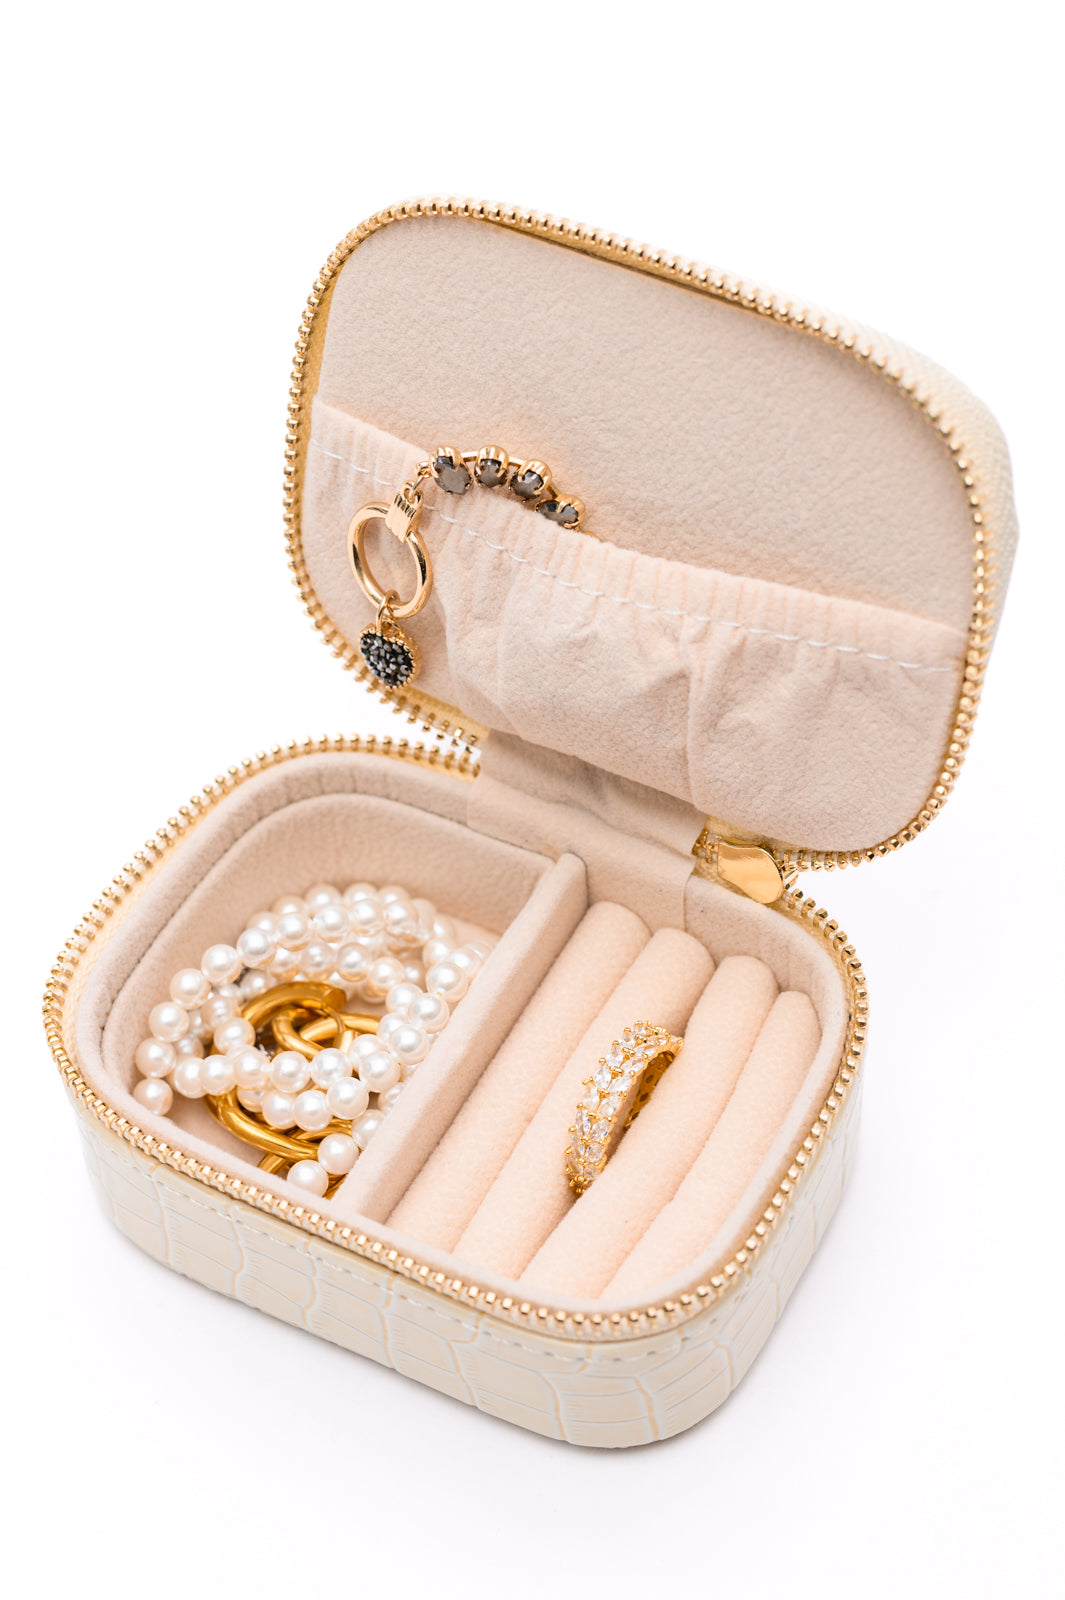 Small Travel Jewelry Case - Cream Snakeskin - Inspired Eye Boutique